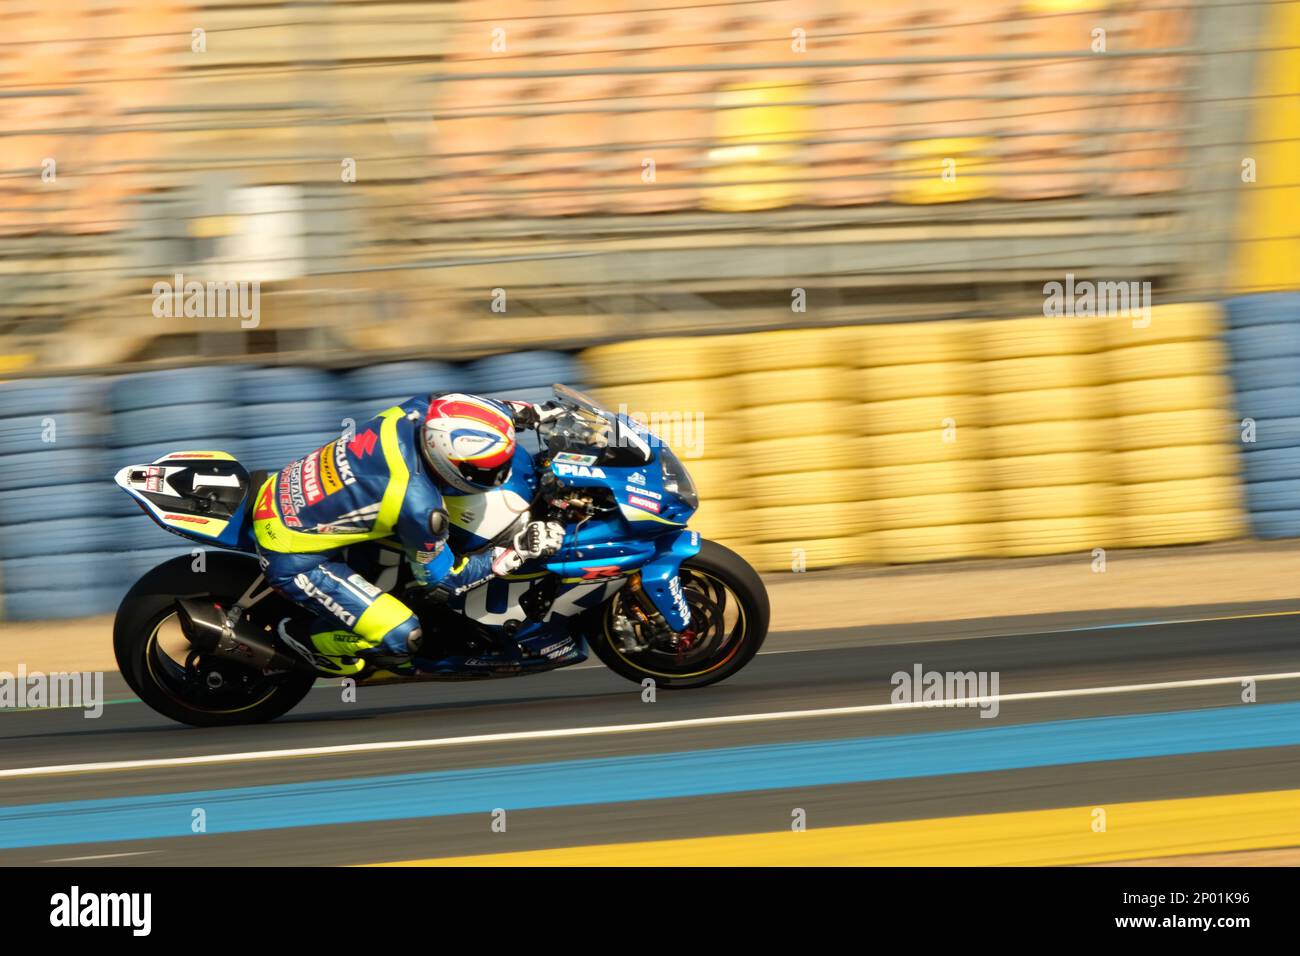 April 13, 2017 - Le Mans, Sarthe, France - Suzuki Endurance Racing Team  (FRA) Suzuki GSXR 1000R (1) rider VINCENT PHILIPPE (FRA) during the free  practice session of the 24 hours motorcycle